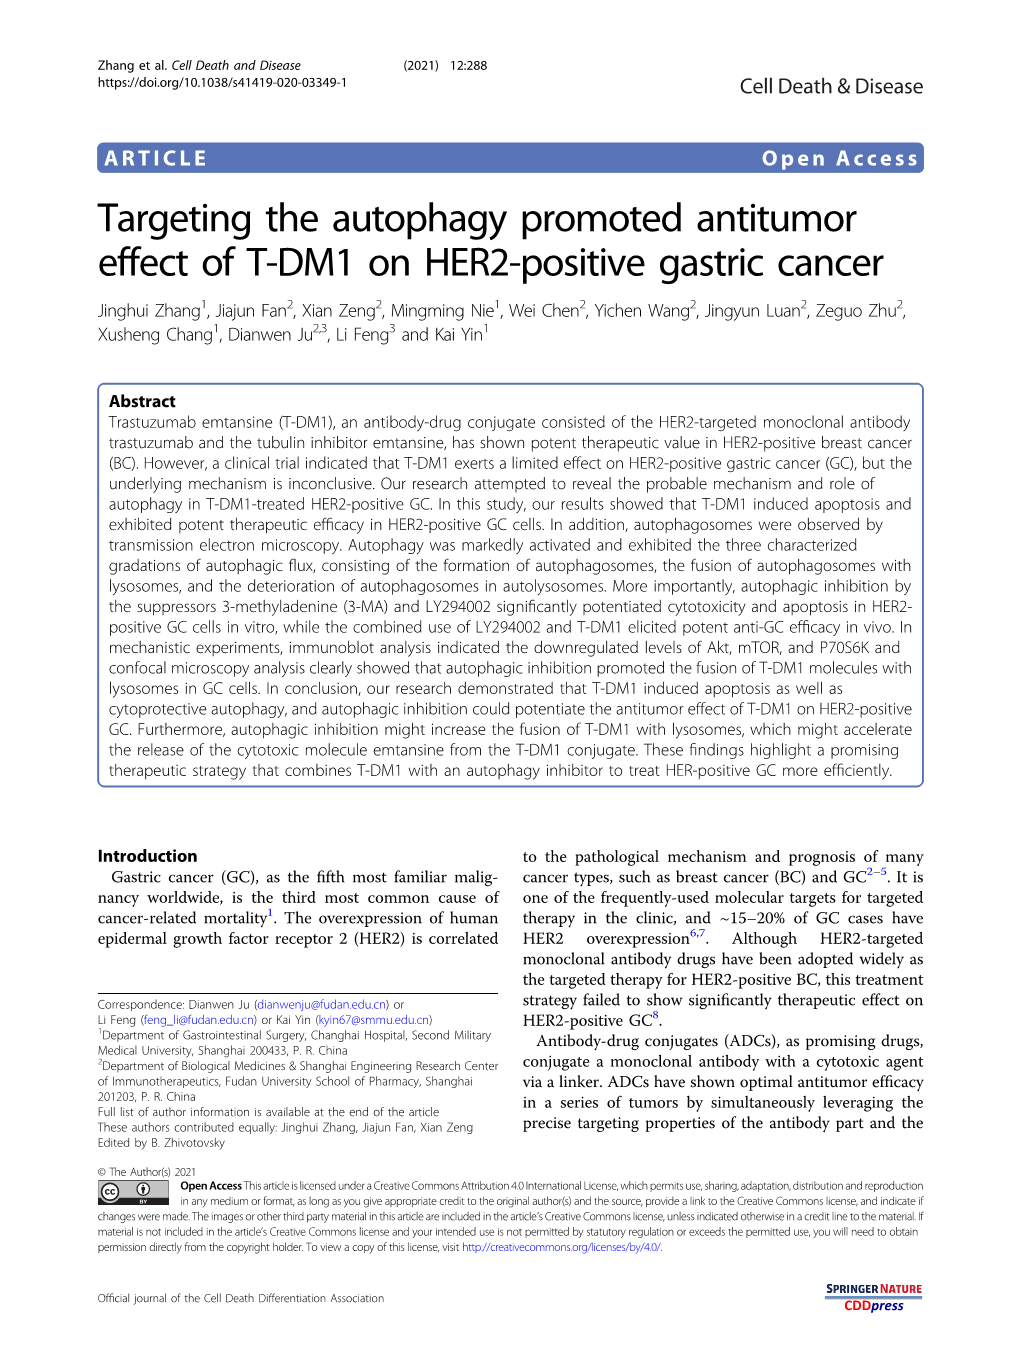 Targeting the Autophagy Promoted Antitumor Effect of T-DM1 on HER2